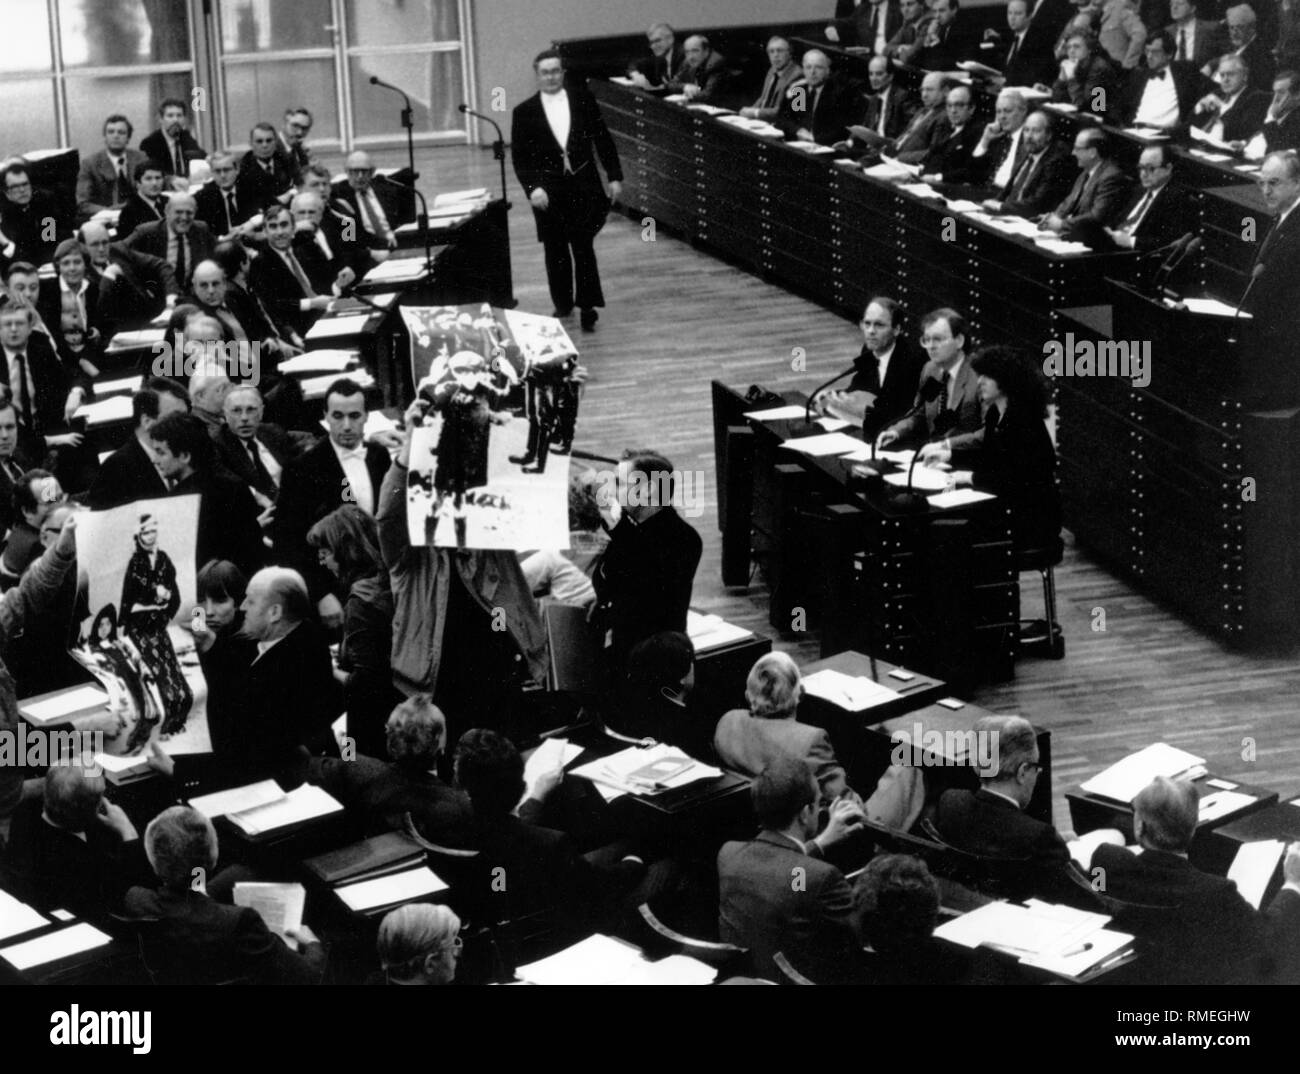 The marshals in the Bundestag when collecting the war pictures of the members of the parliamentary group of the Greens. With the action, the Greens wanted to demonstrate against war. Right, Chancellor Helmut Kohl. Stock Photo